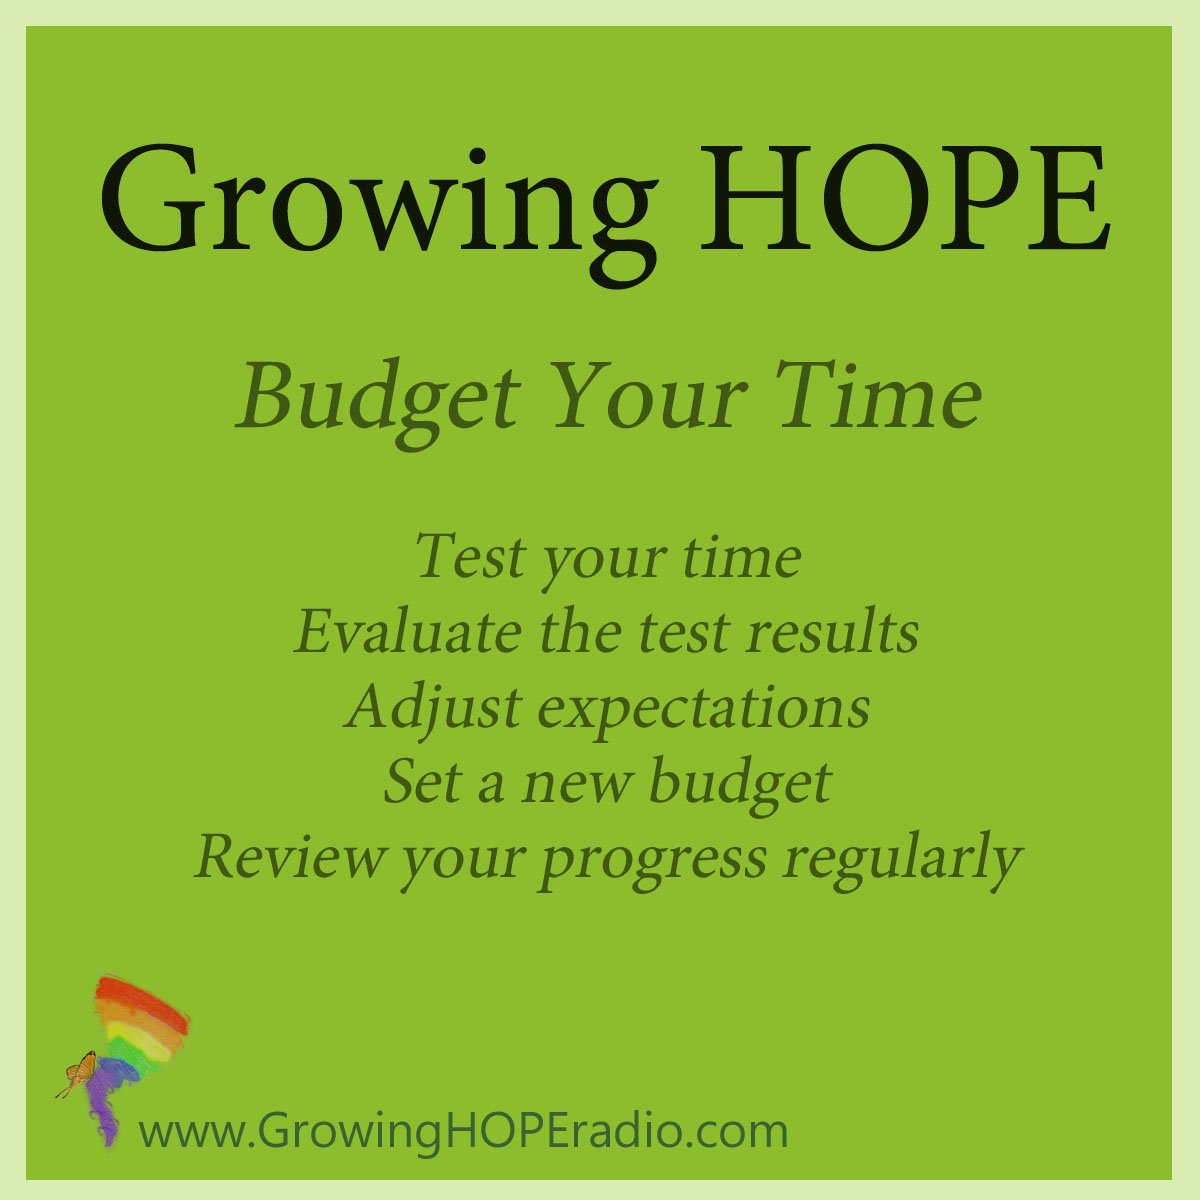 Growing HOPE Daily - 5 Tips to Budget Your Time